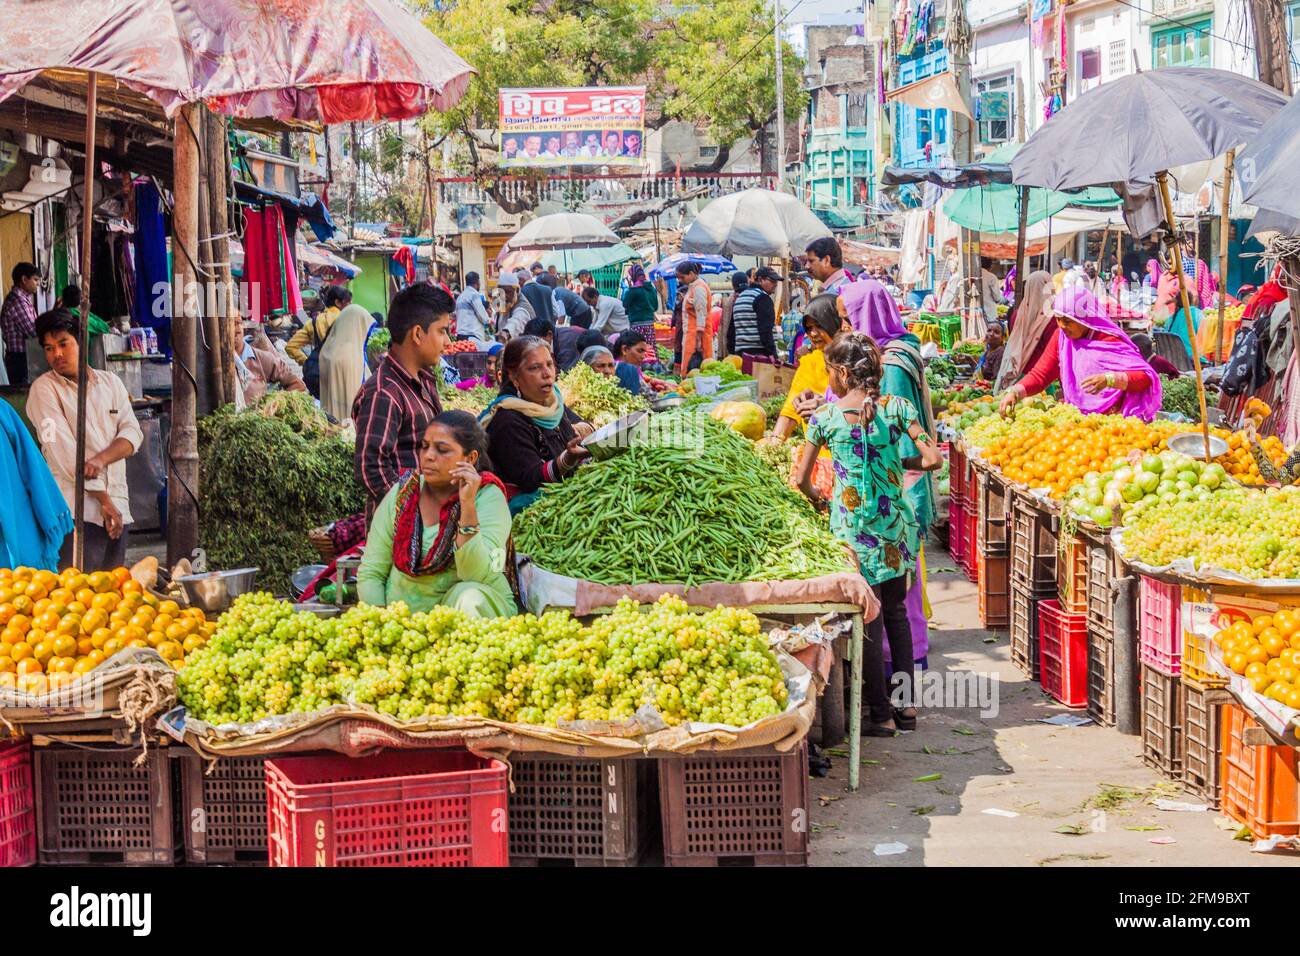 UDAIPUR, INDIA - FEBRUARY 14, 2017: Fruit and vegetable market in Udaipur, Rajasthan state, India Stock Photo